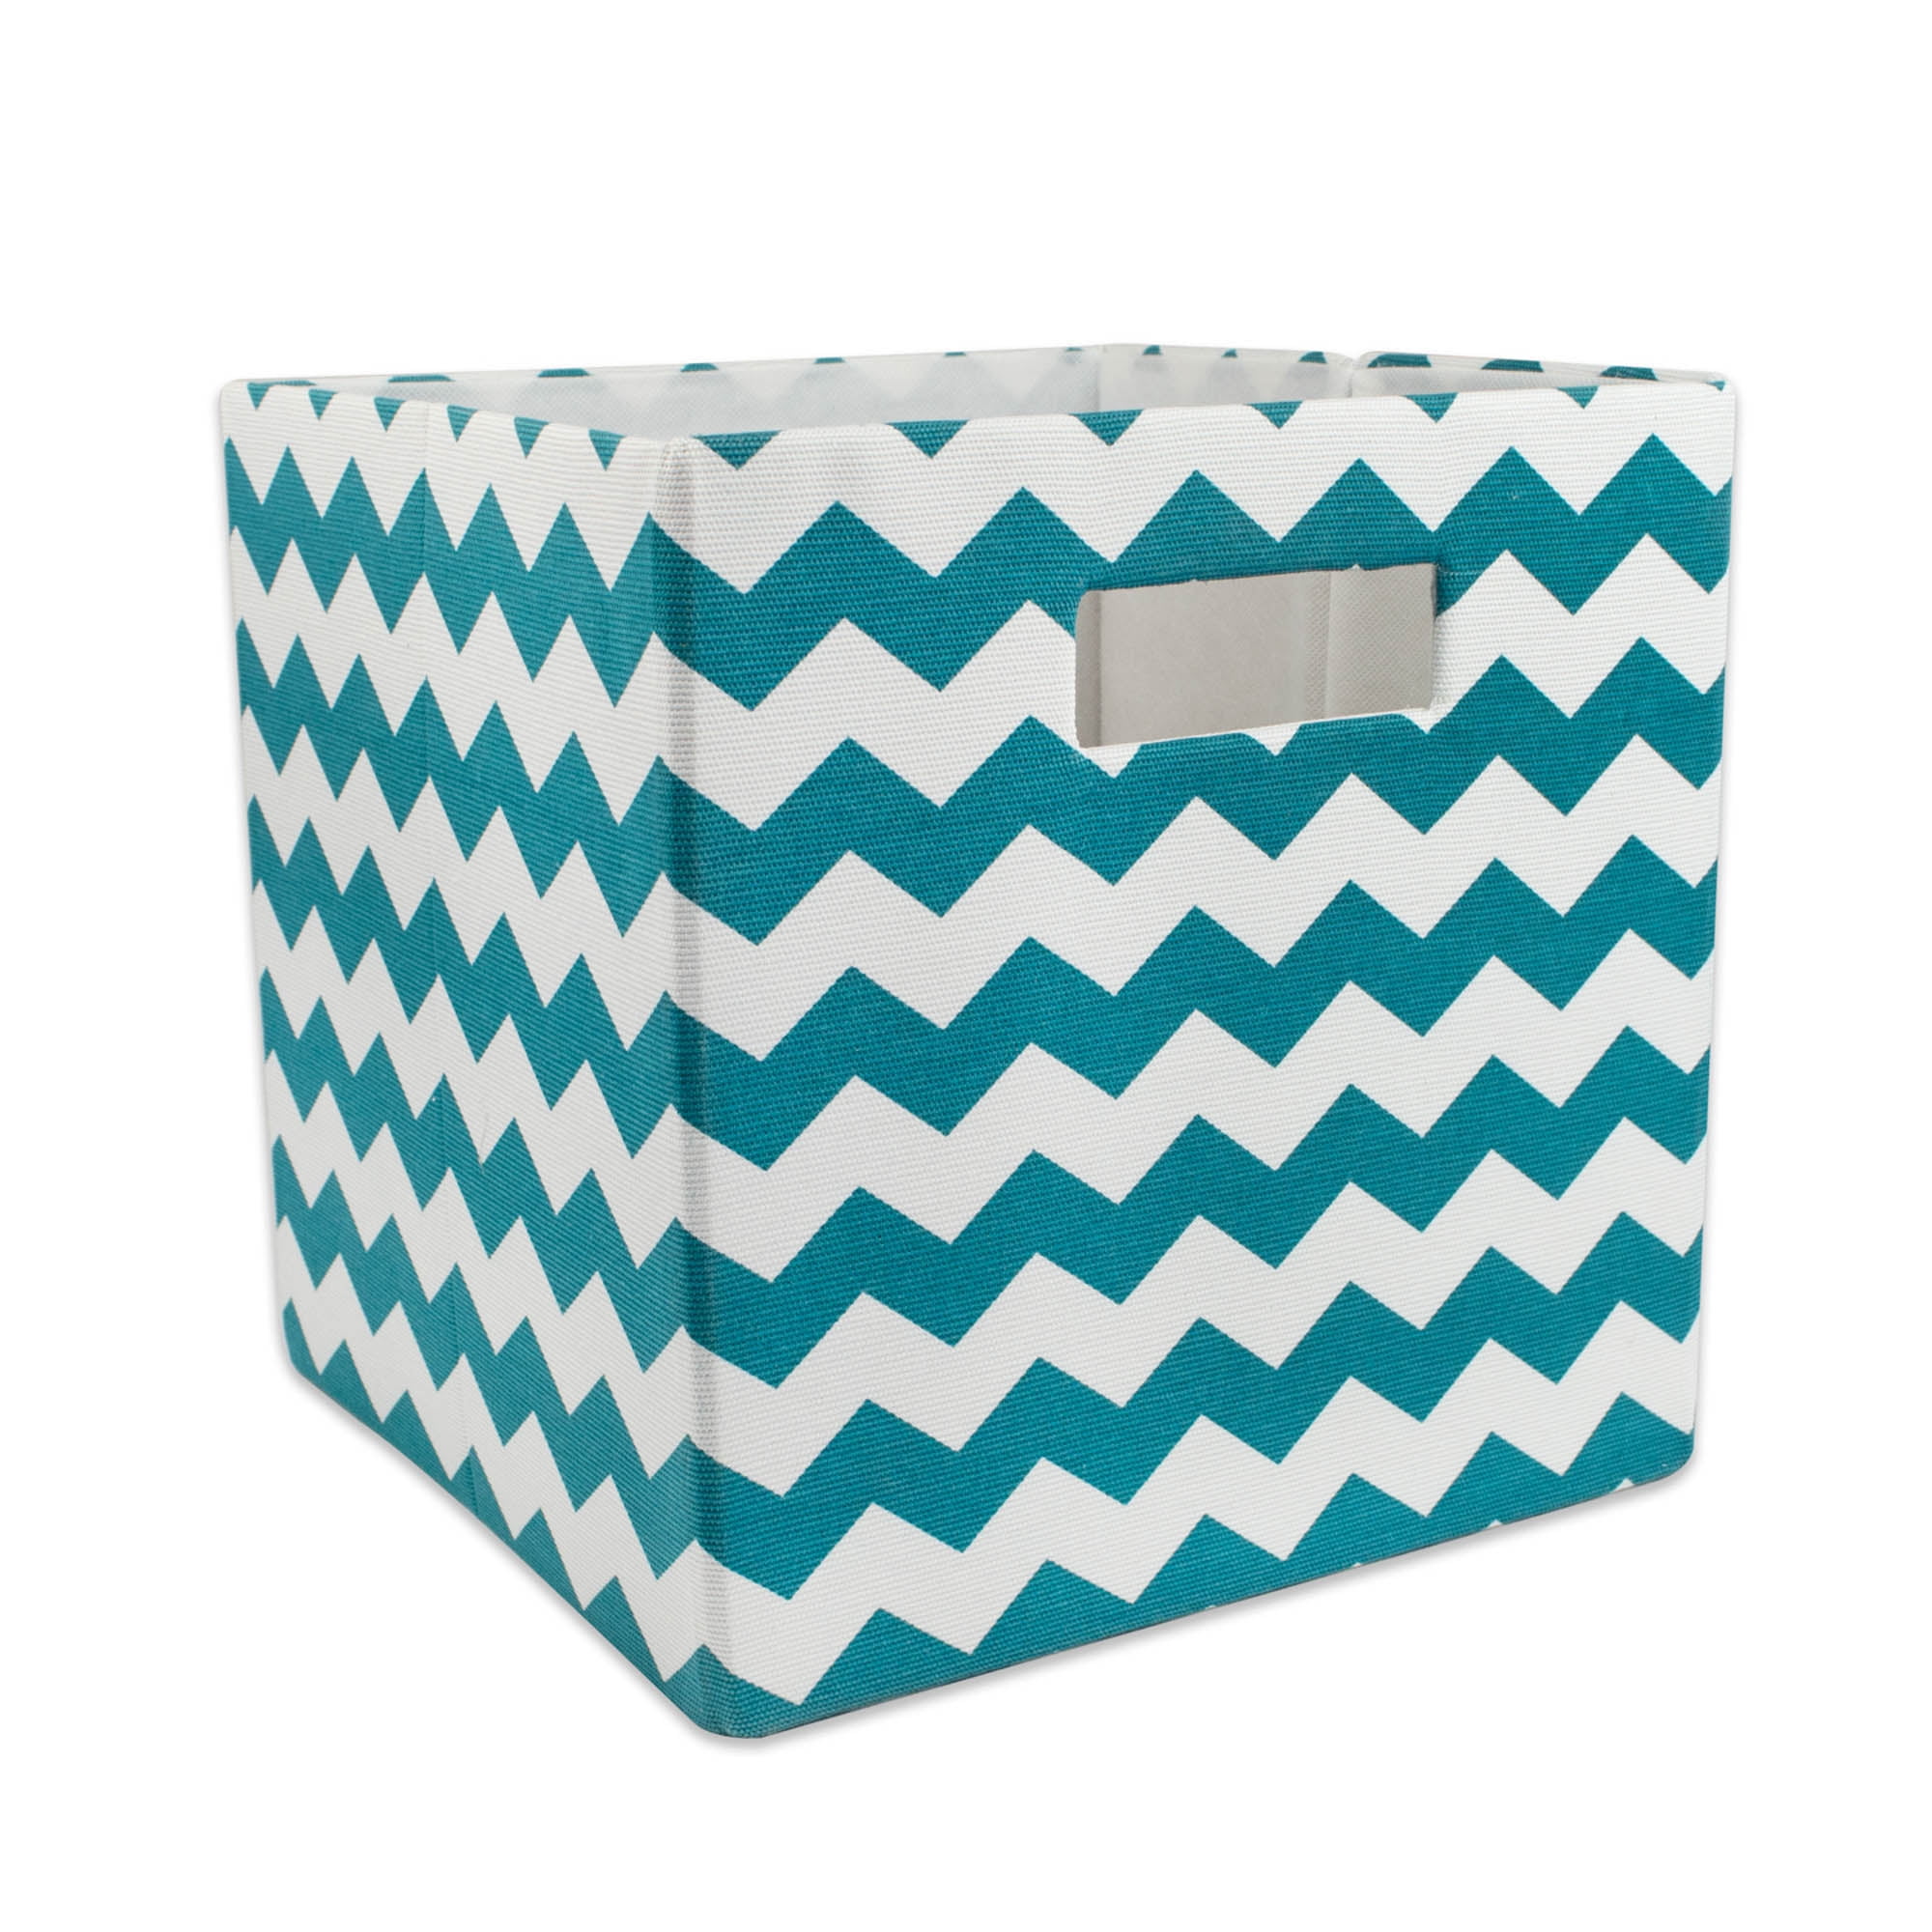 Design Imports Camz36641 11 X 11 X 11 In. Chevron Square Polyester Storage Cube, Teal